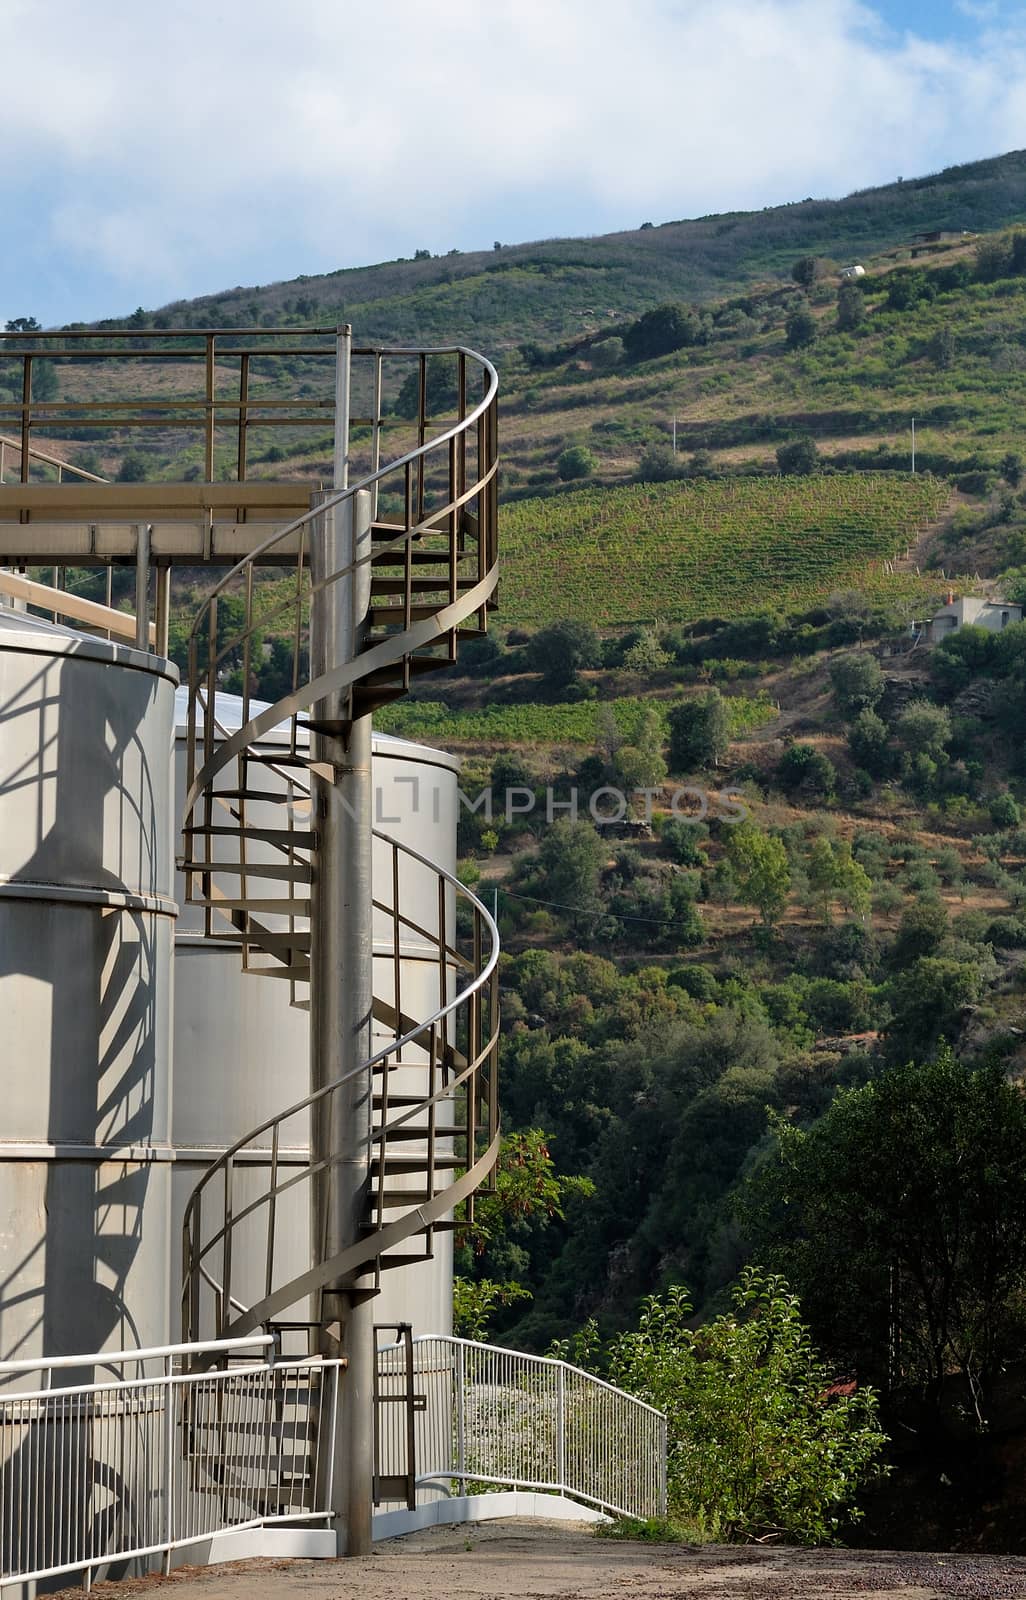 Silos and steel machinery for the processing of the grapes.